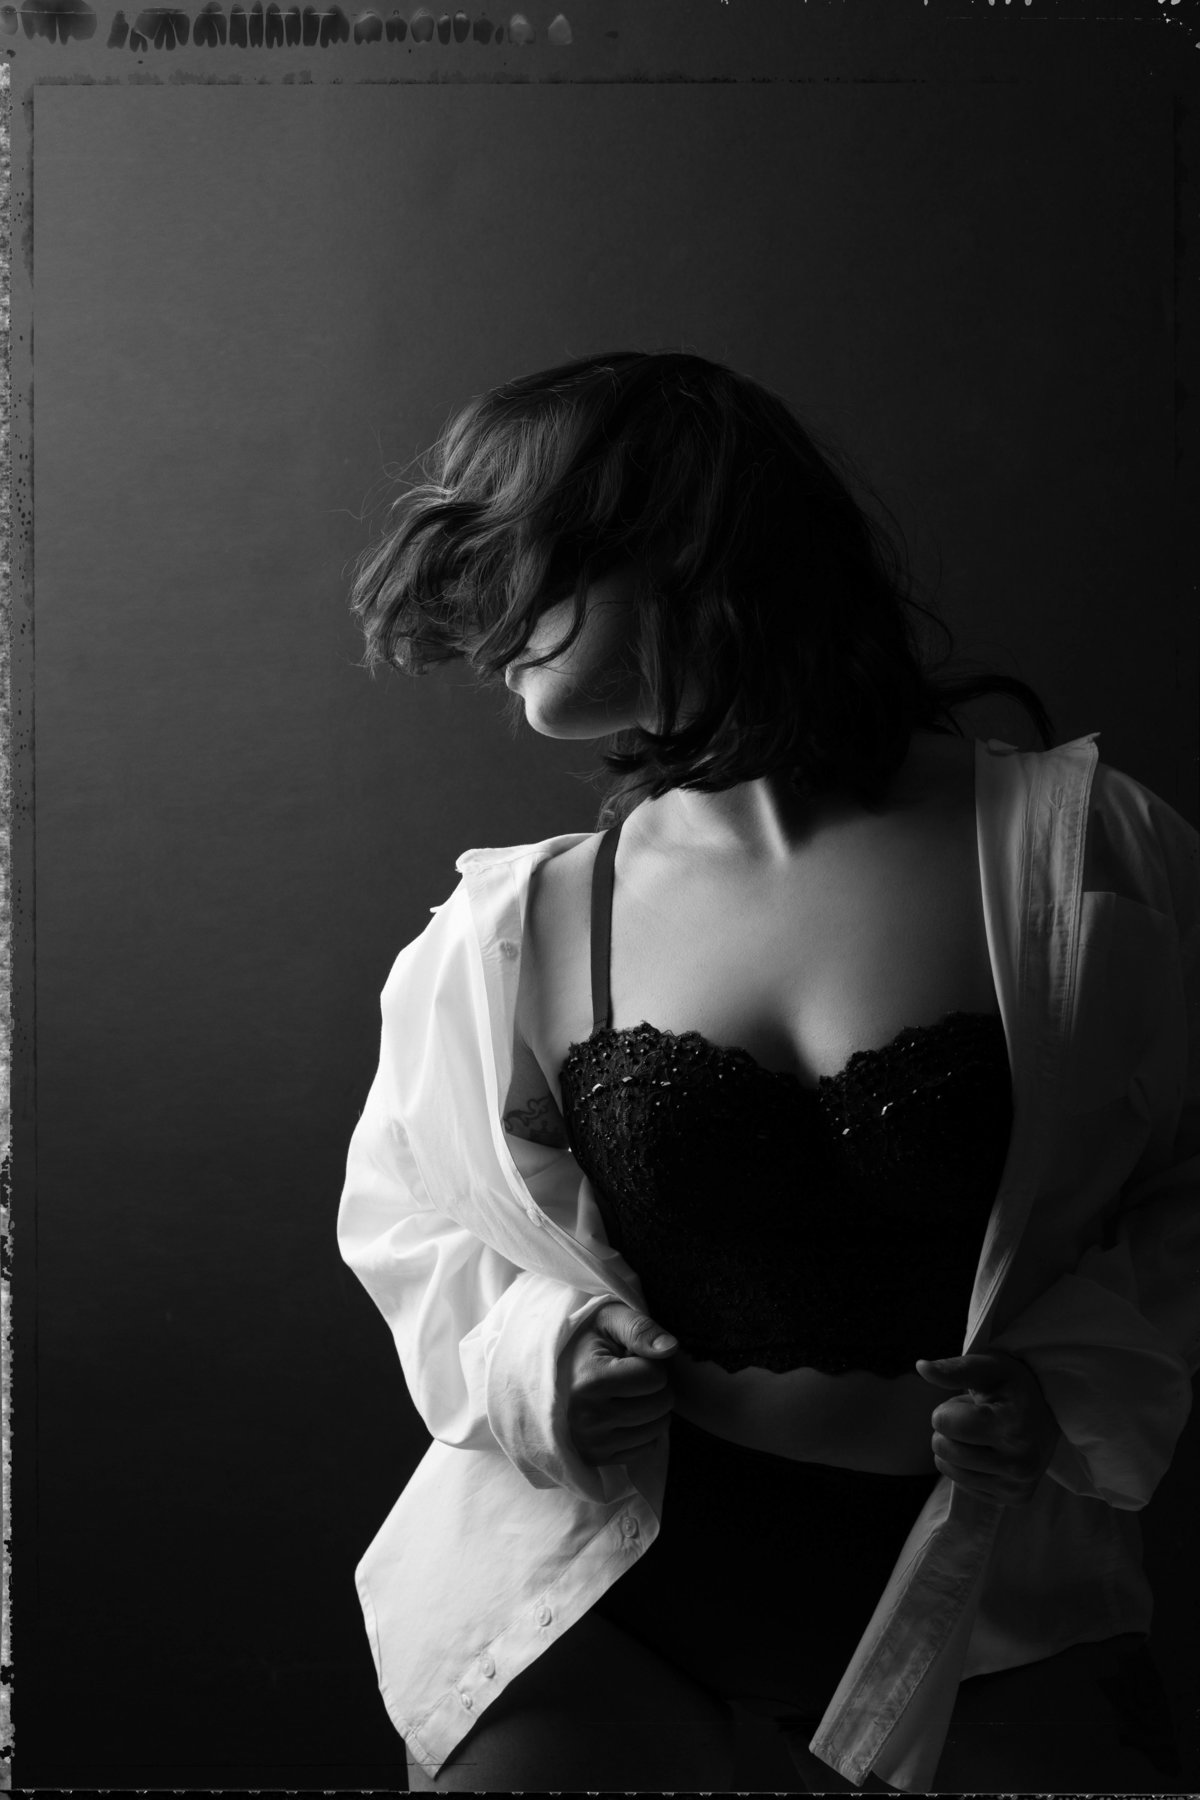 Felicia Reed Photograph-Austin Texas-Photographer-Boudoir-Black and White-Behind the Scenes